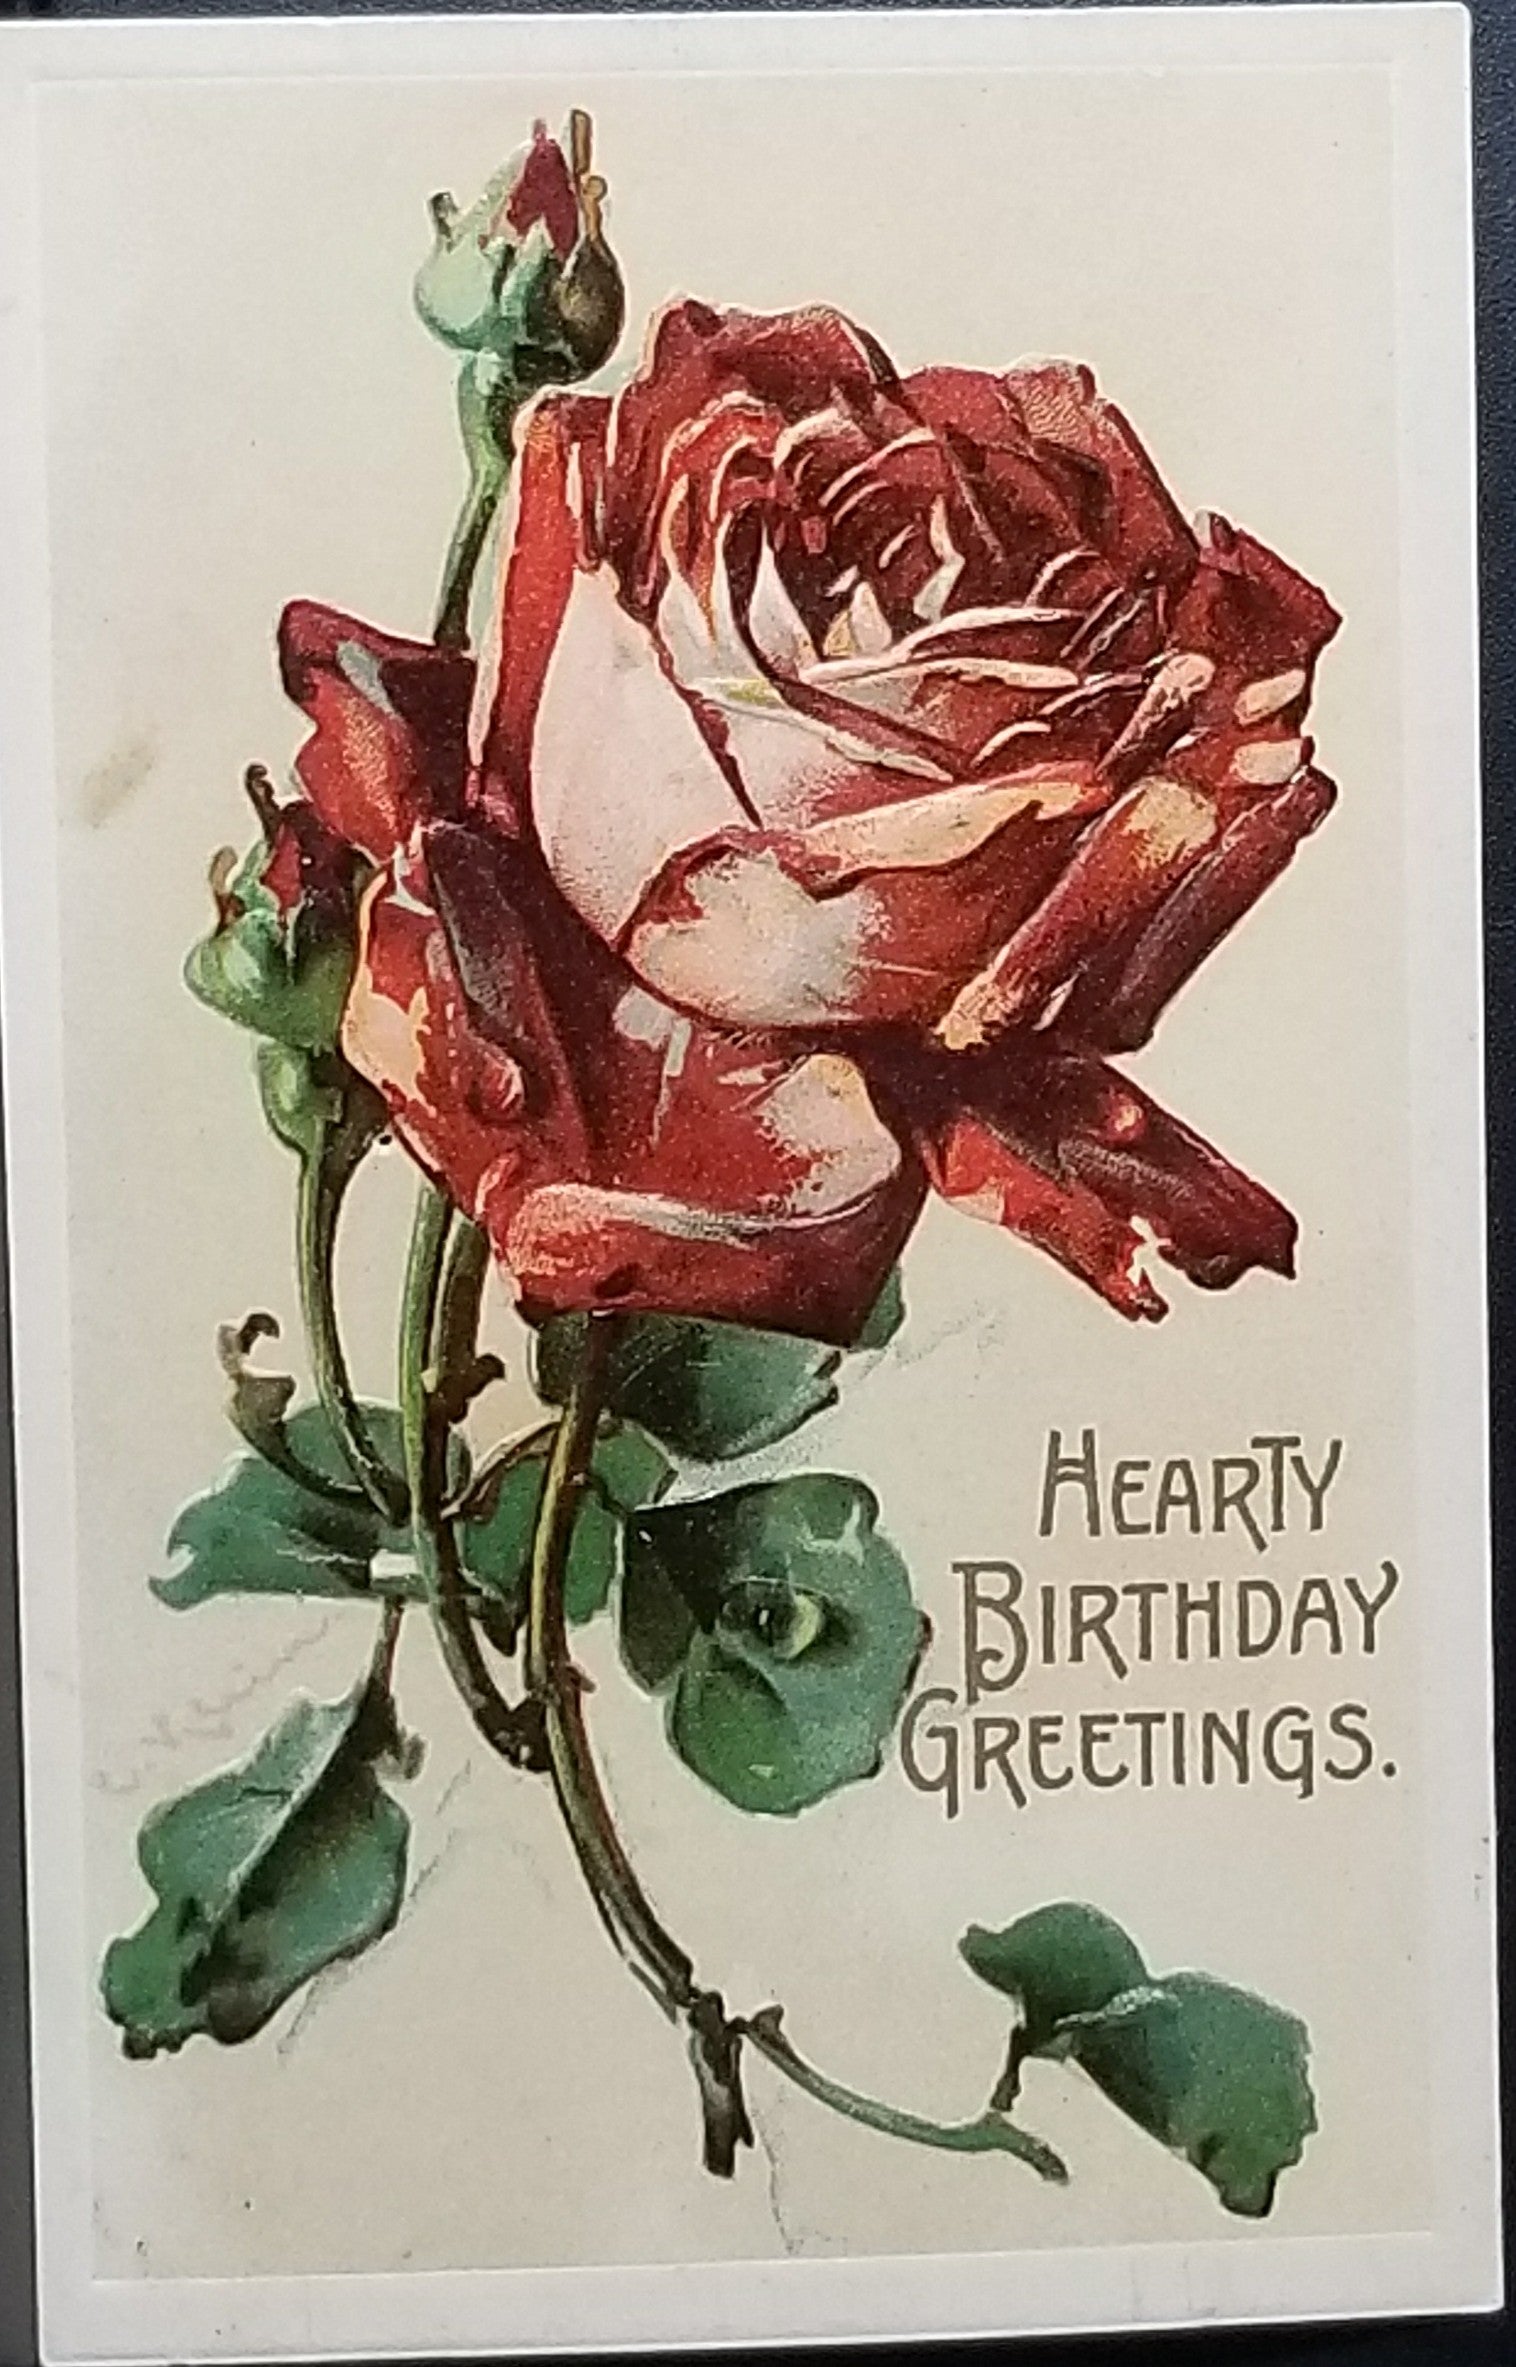 Beautiful Birthday Card With Red Roses